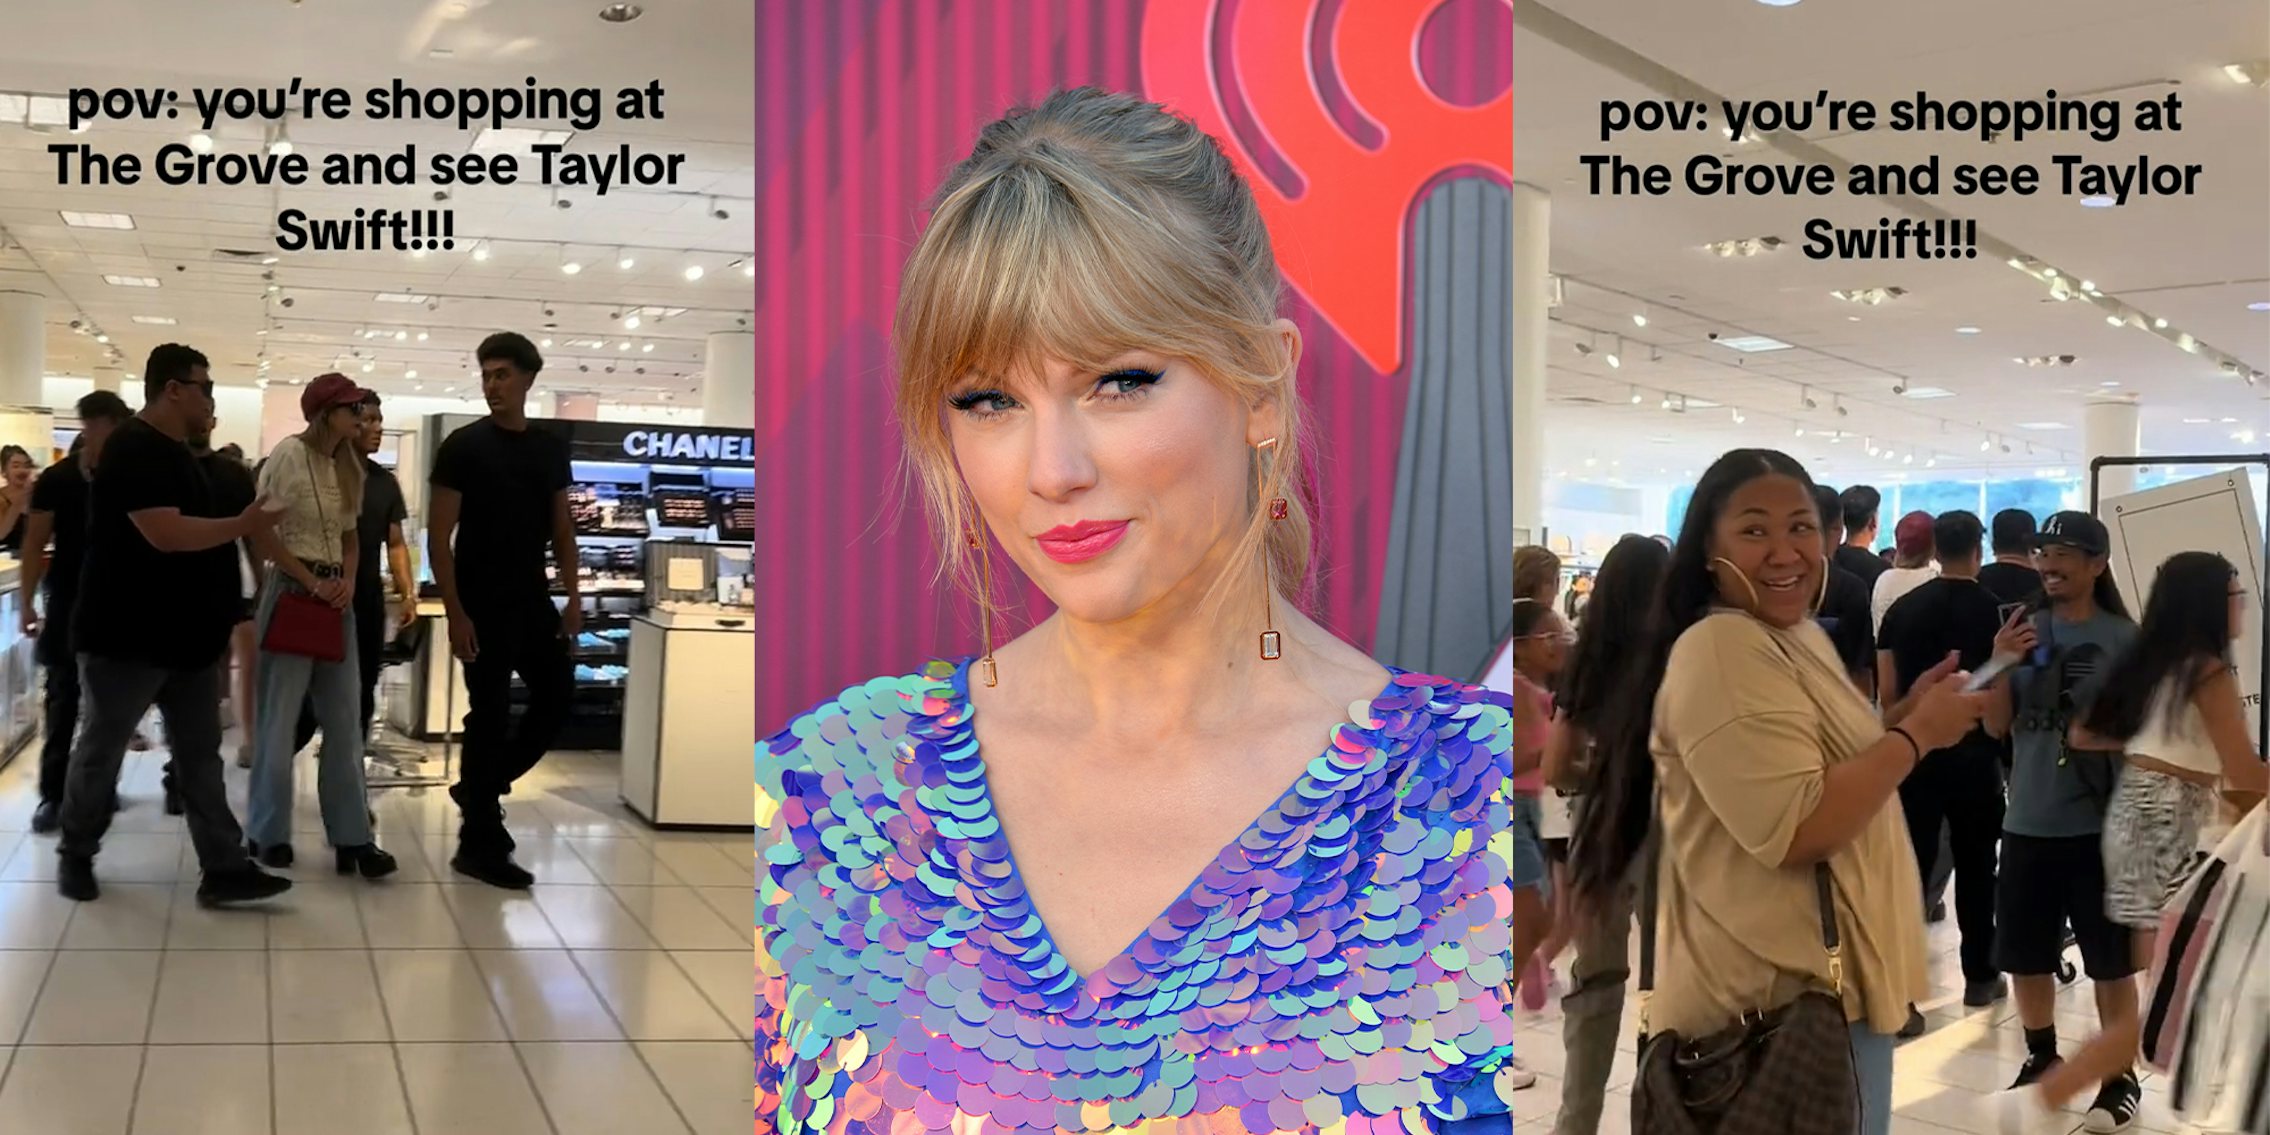 Fake Taylor Swift walks around mall with security guards